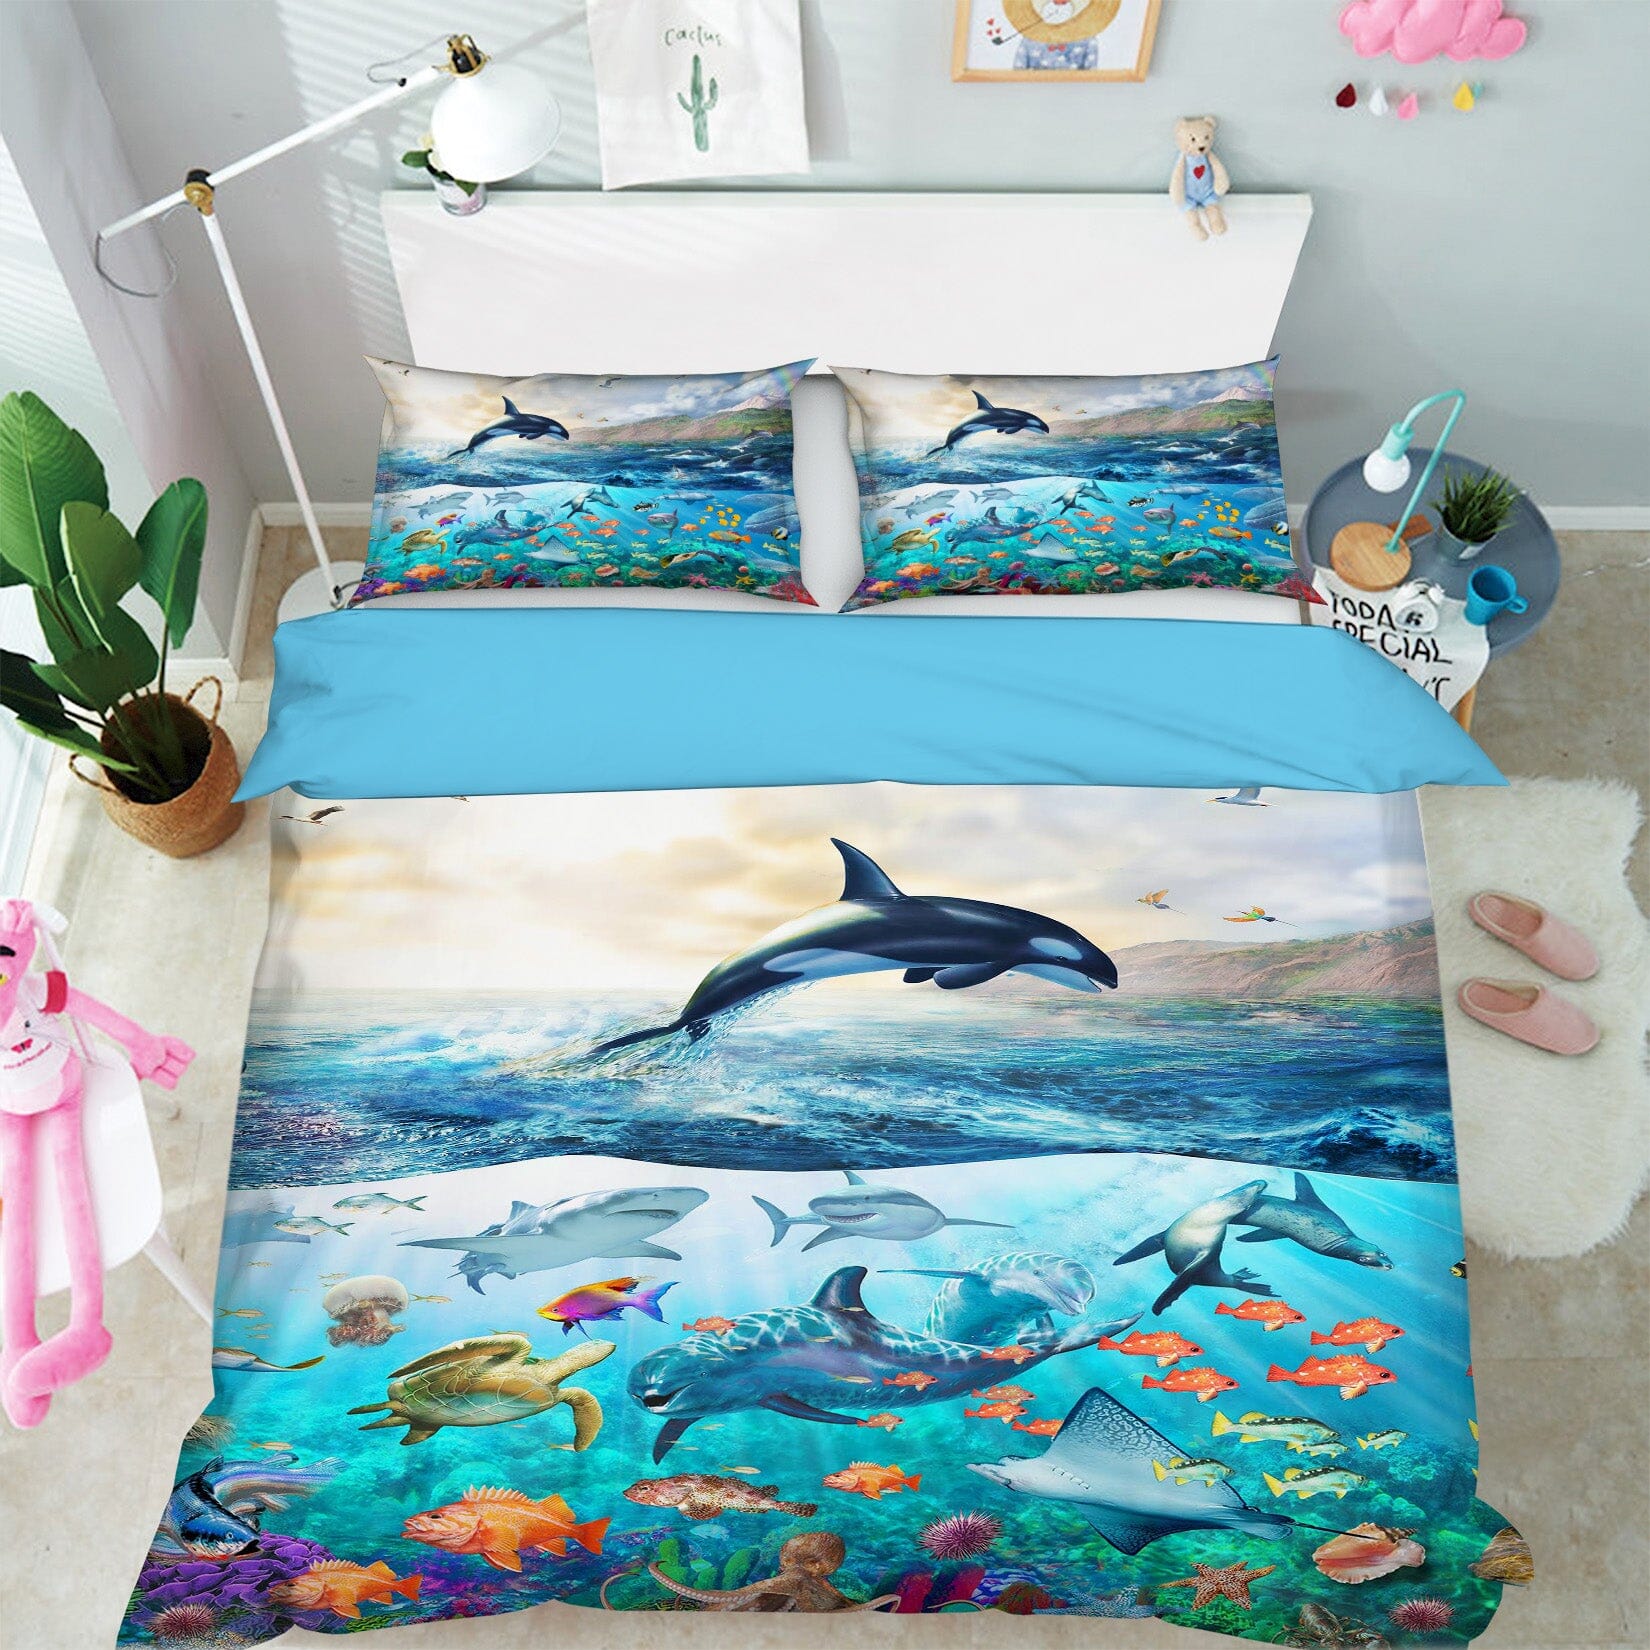 3D Ocean Panorama 2110 Adrian Chesterman Bedding Bed Pillowcases Quilt Quiet Covers AJ Creativity Home 